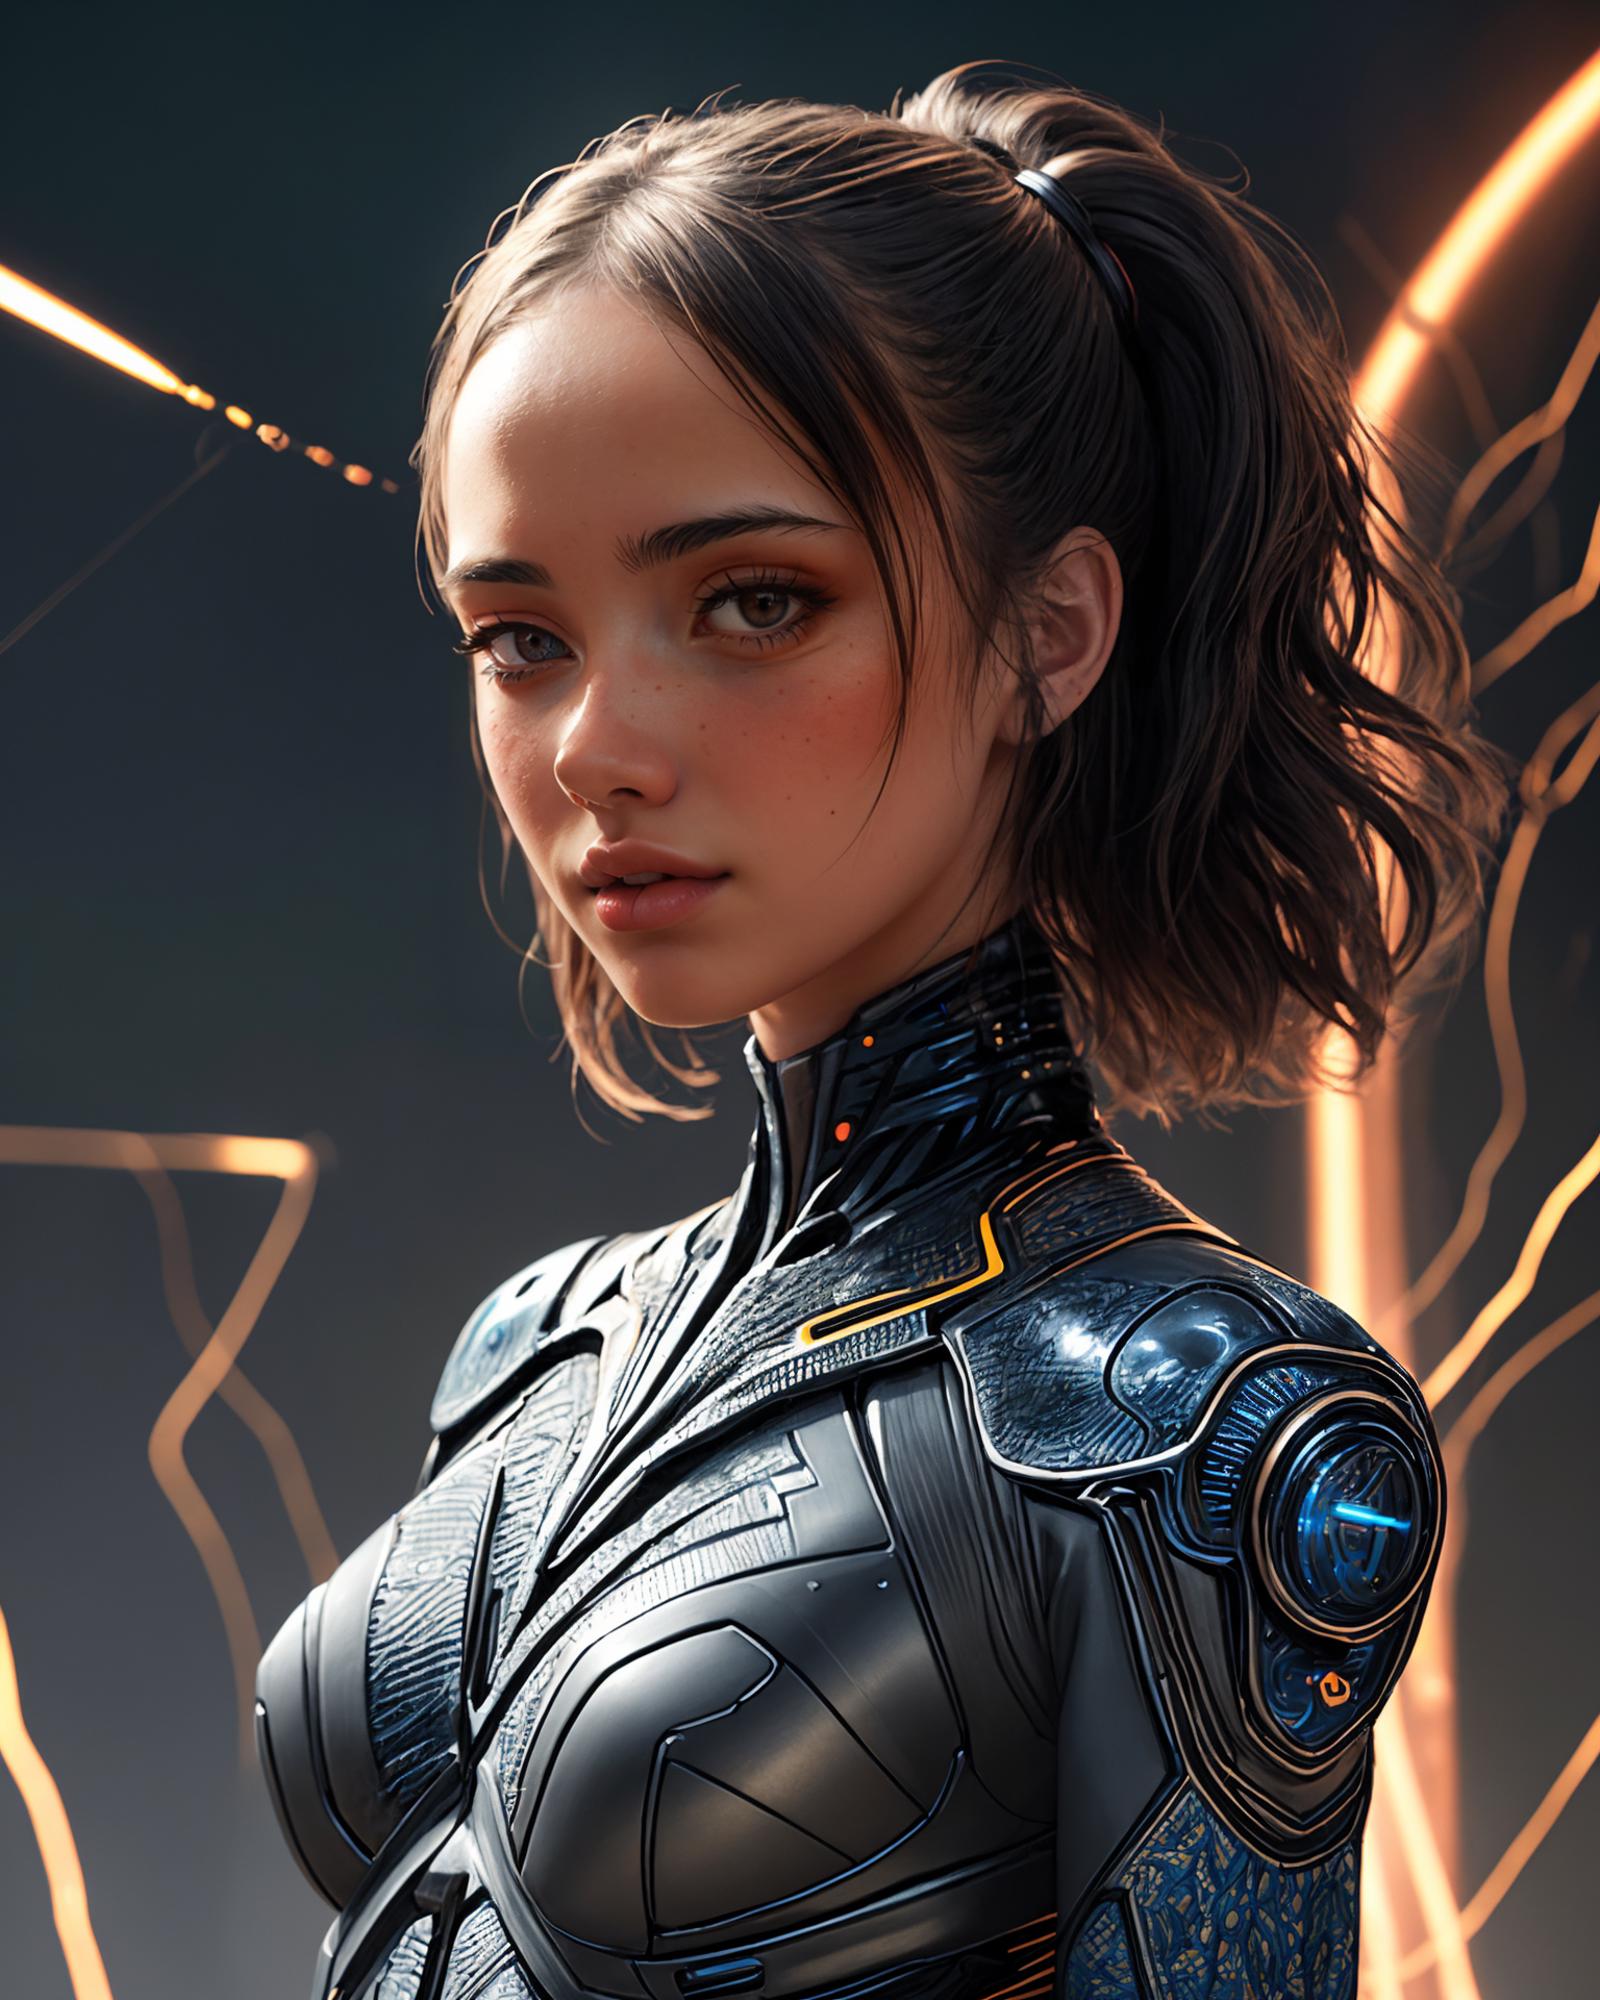 A digital art of a woman wearing a futuristic suit with blue accents.